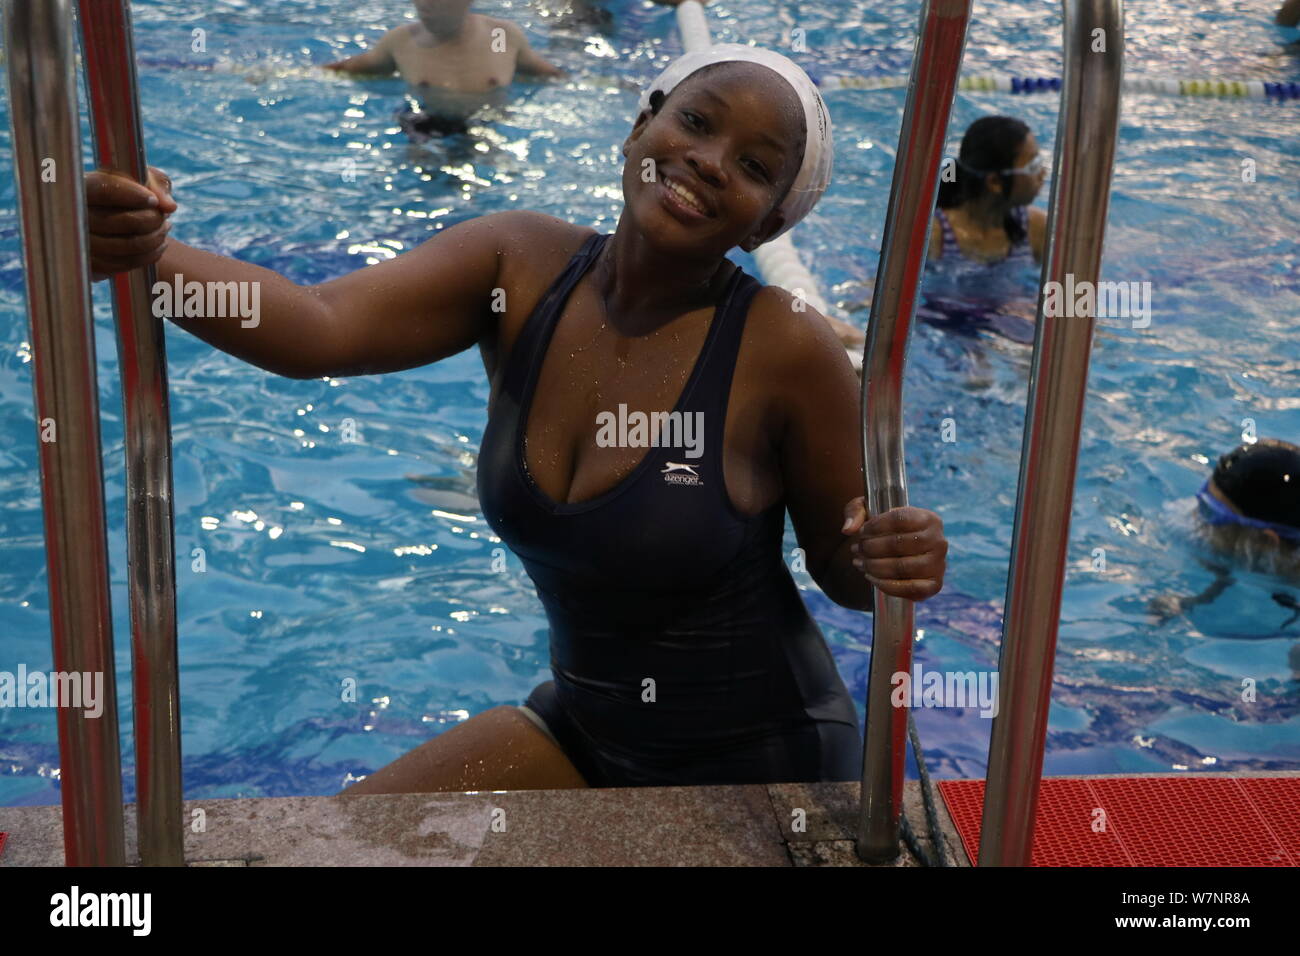 An African student enjoys herself to cool off at a swimming pool on a scorching day in Fuzhou city, southeast China's Fujian province, 23 July 2017. Stock Photo